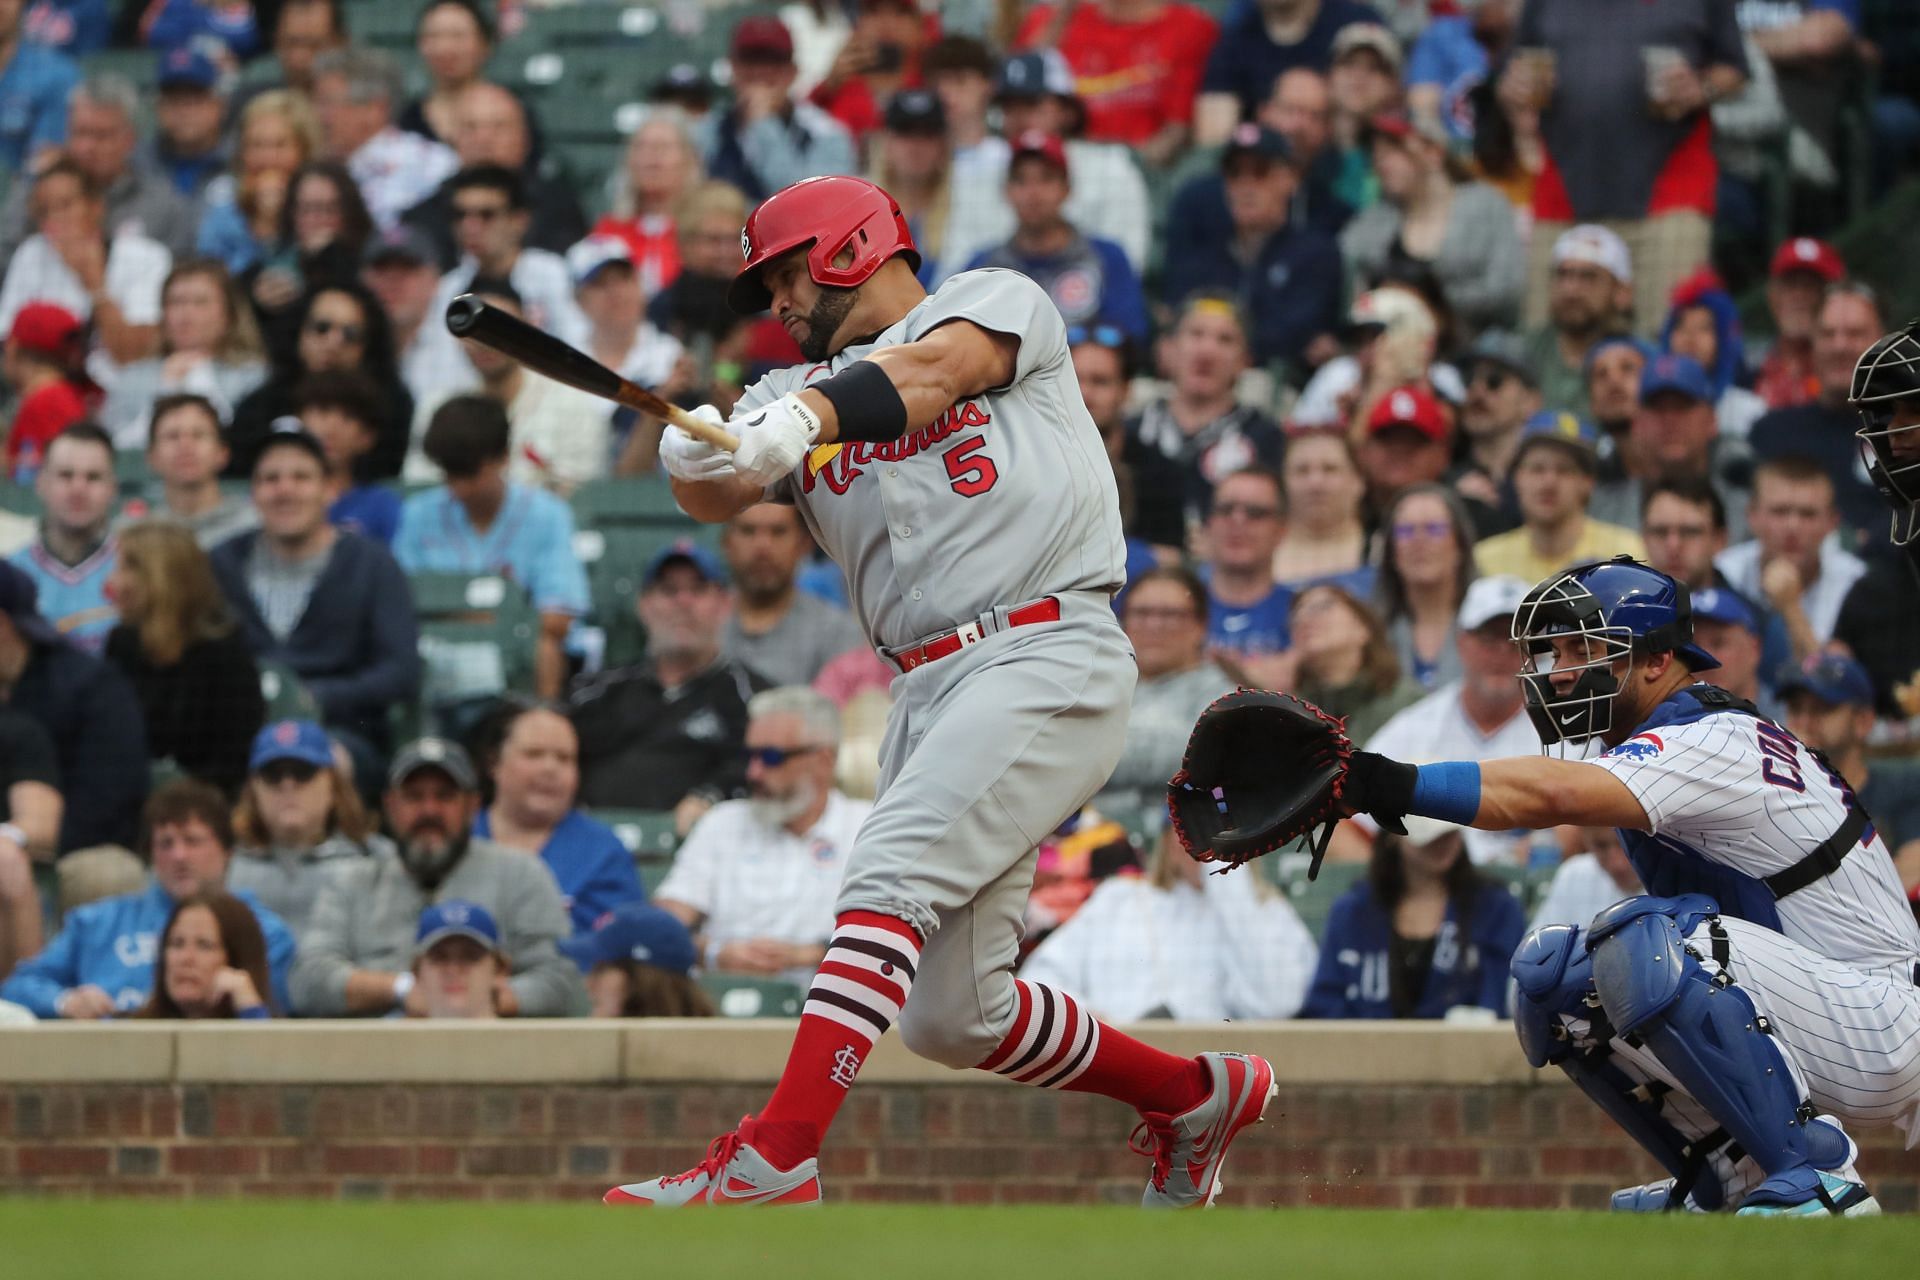 2022 in Review: Albert Pujols Is Great but the Cards Choke in the